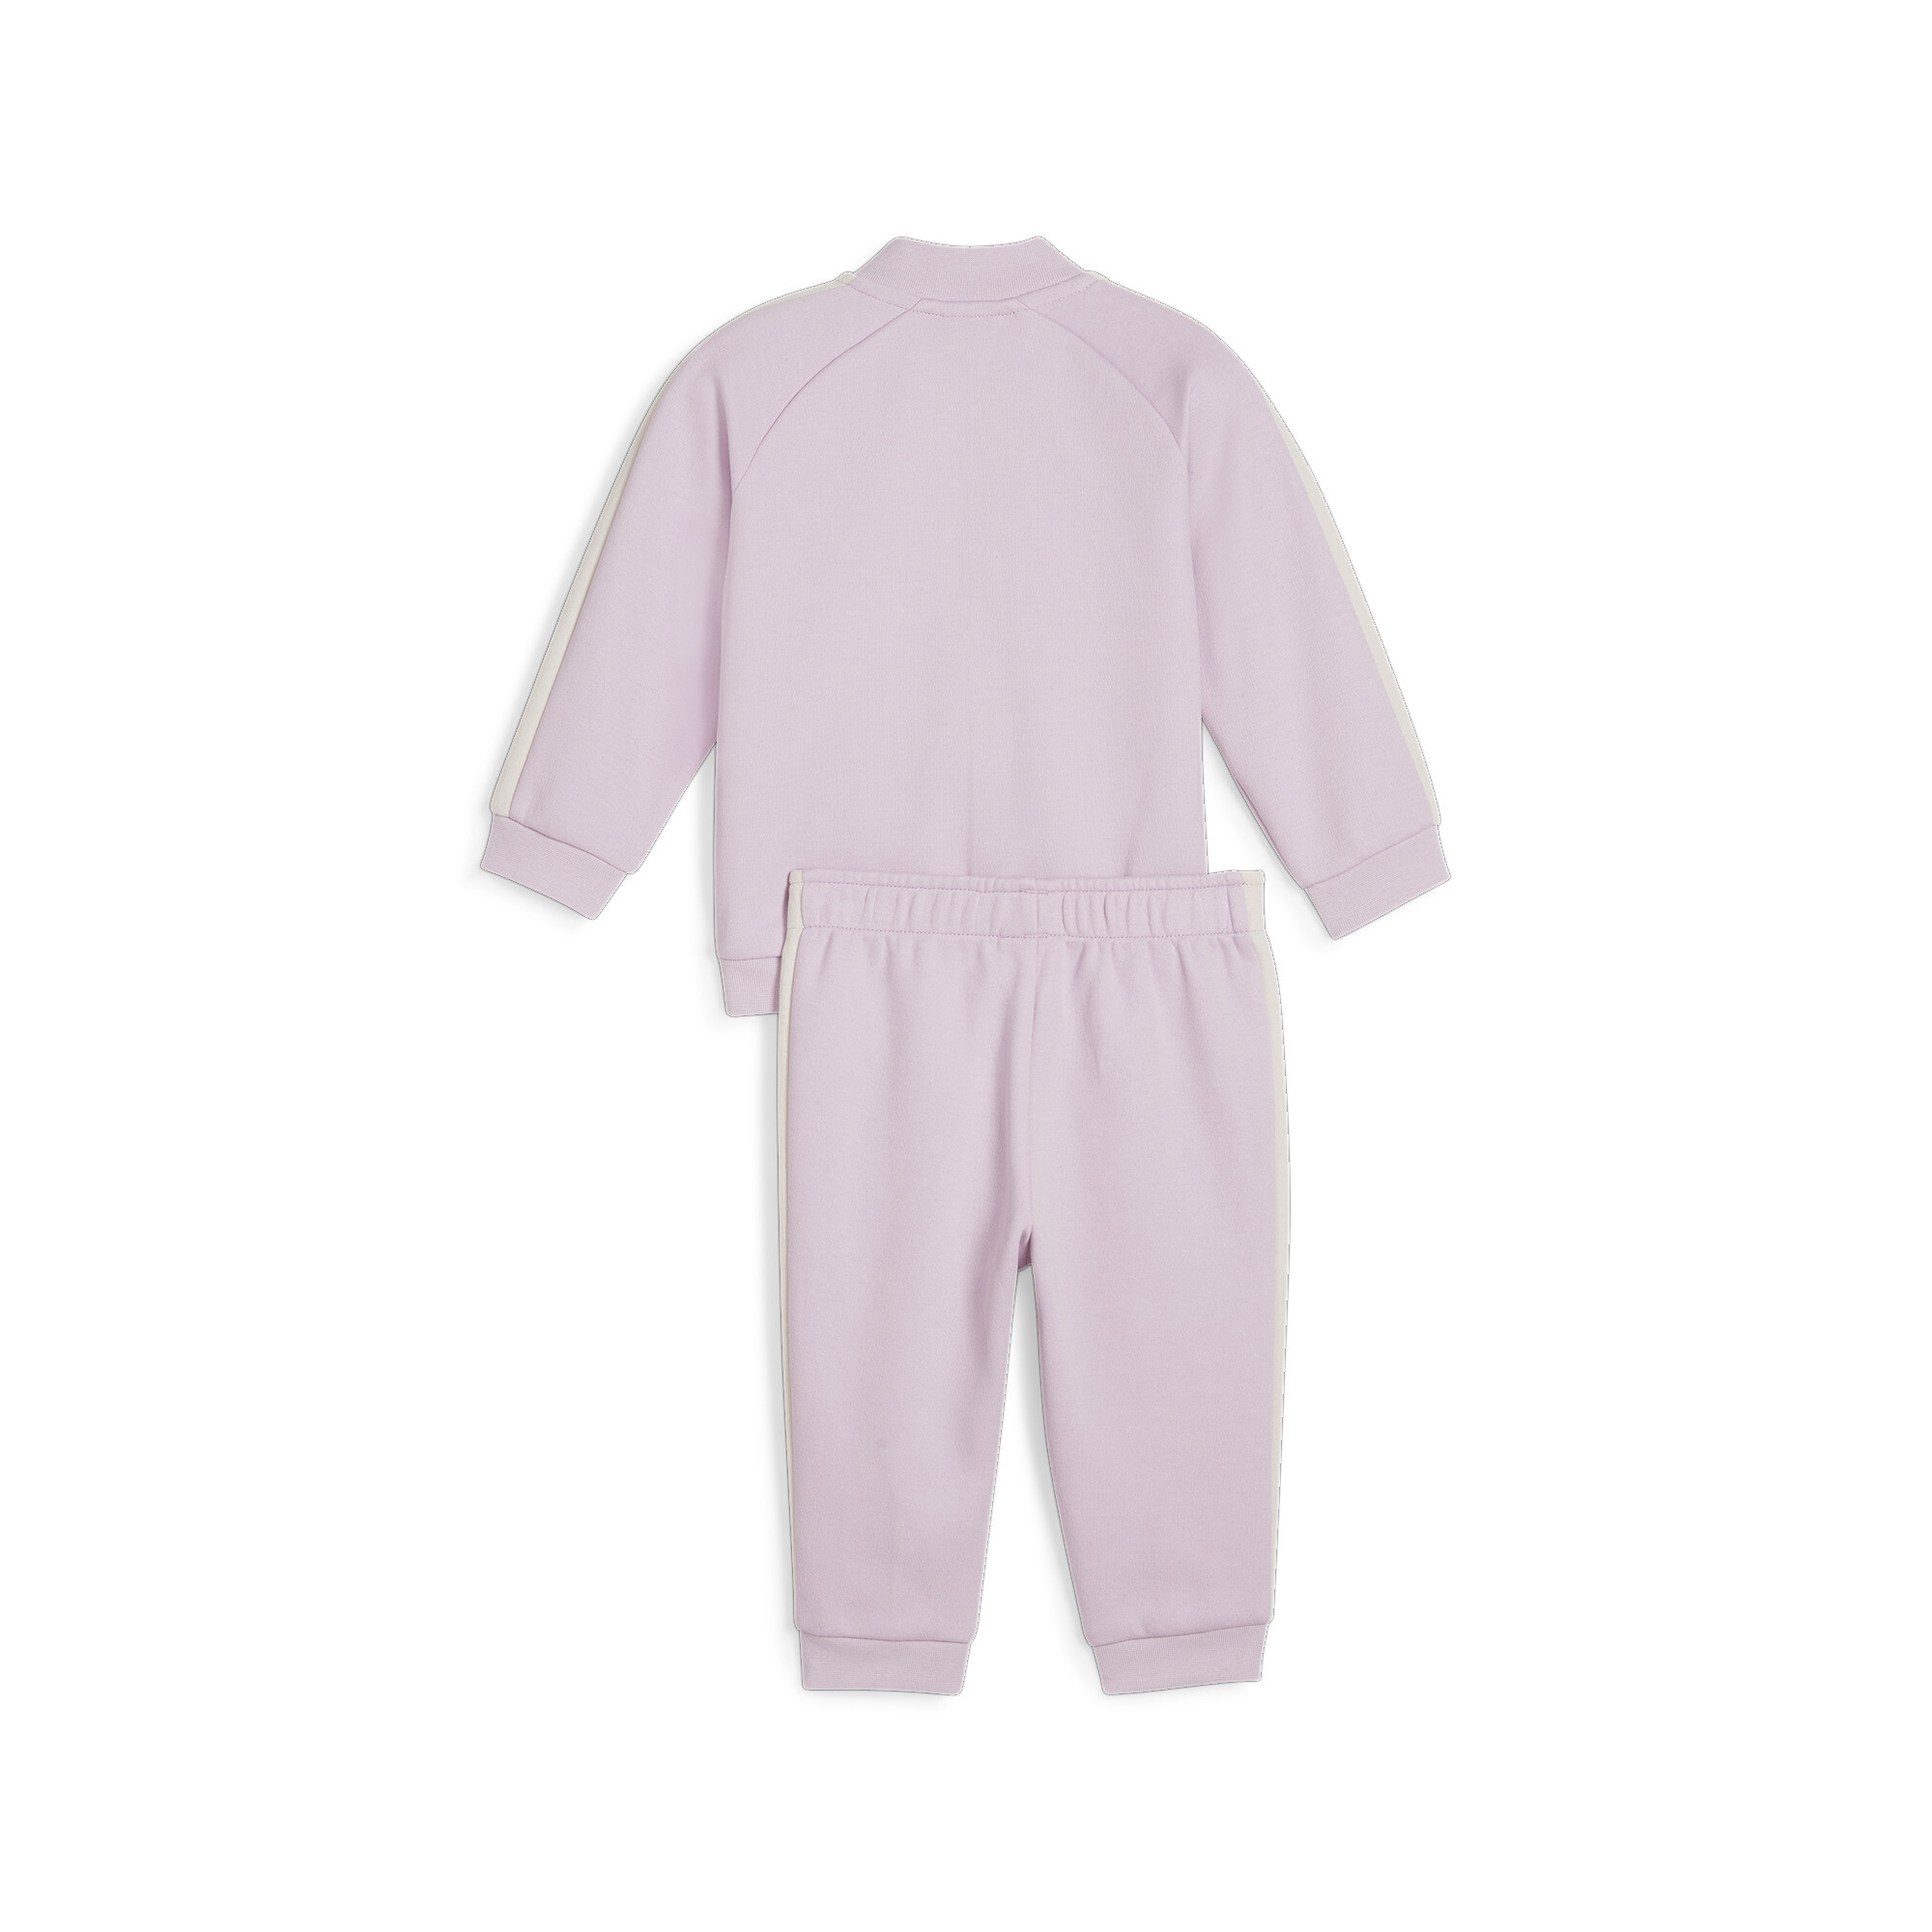 Kids' PUMA MINICATS T7 ICONIC Baby Tracksuit Set In 90 - Purple, Size 12-18 Months